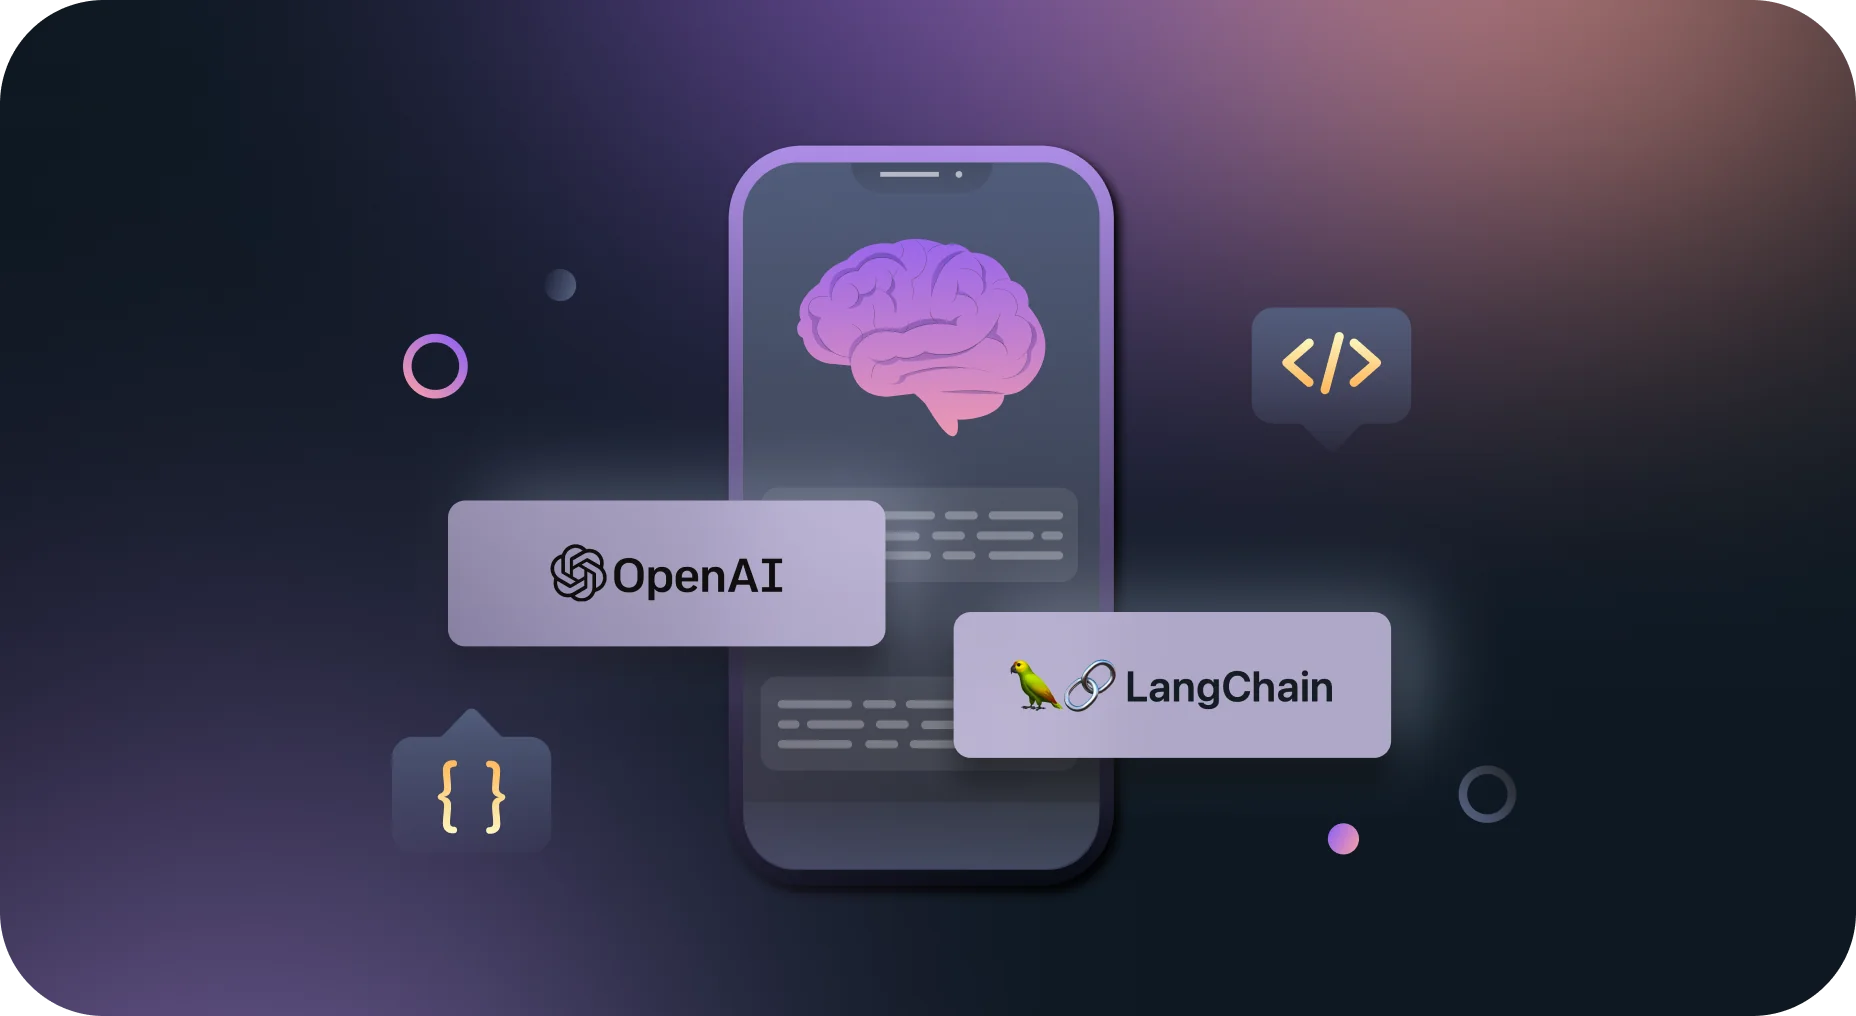 Build an AI Chatbot with OpenAI Assistant API and LangChain